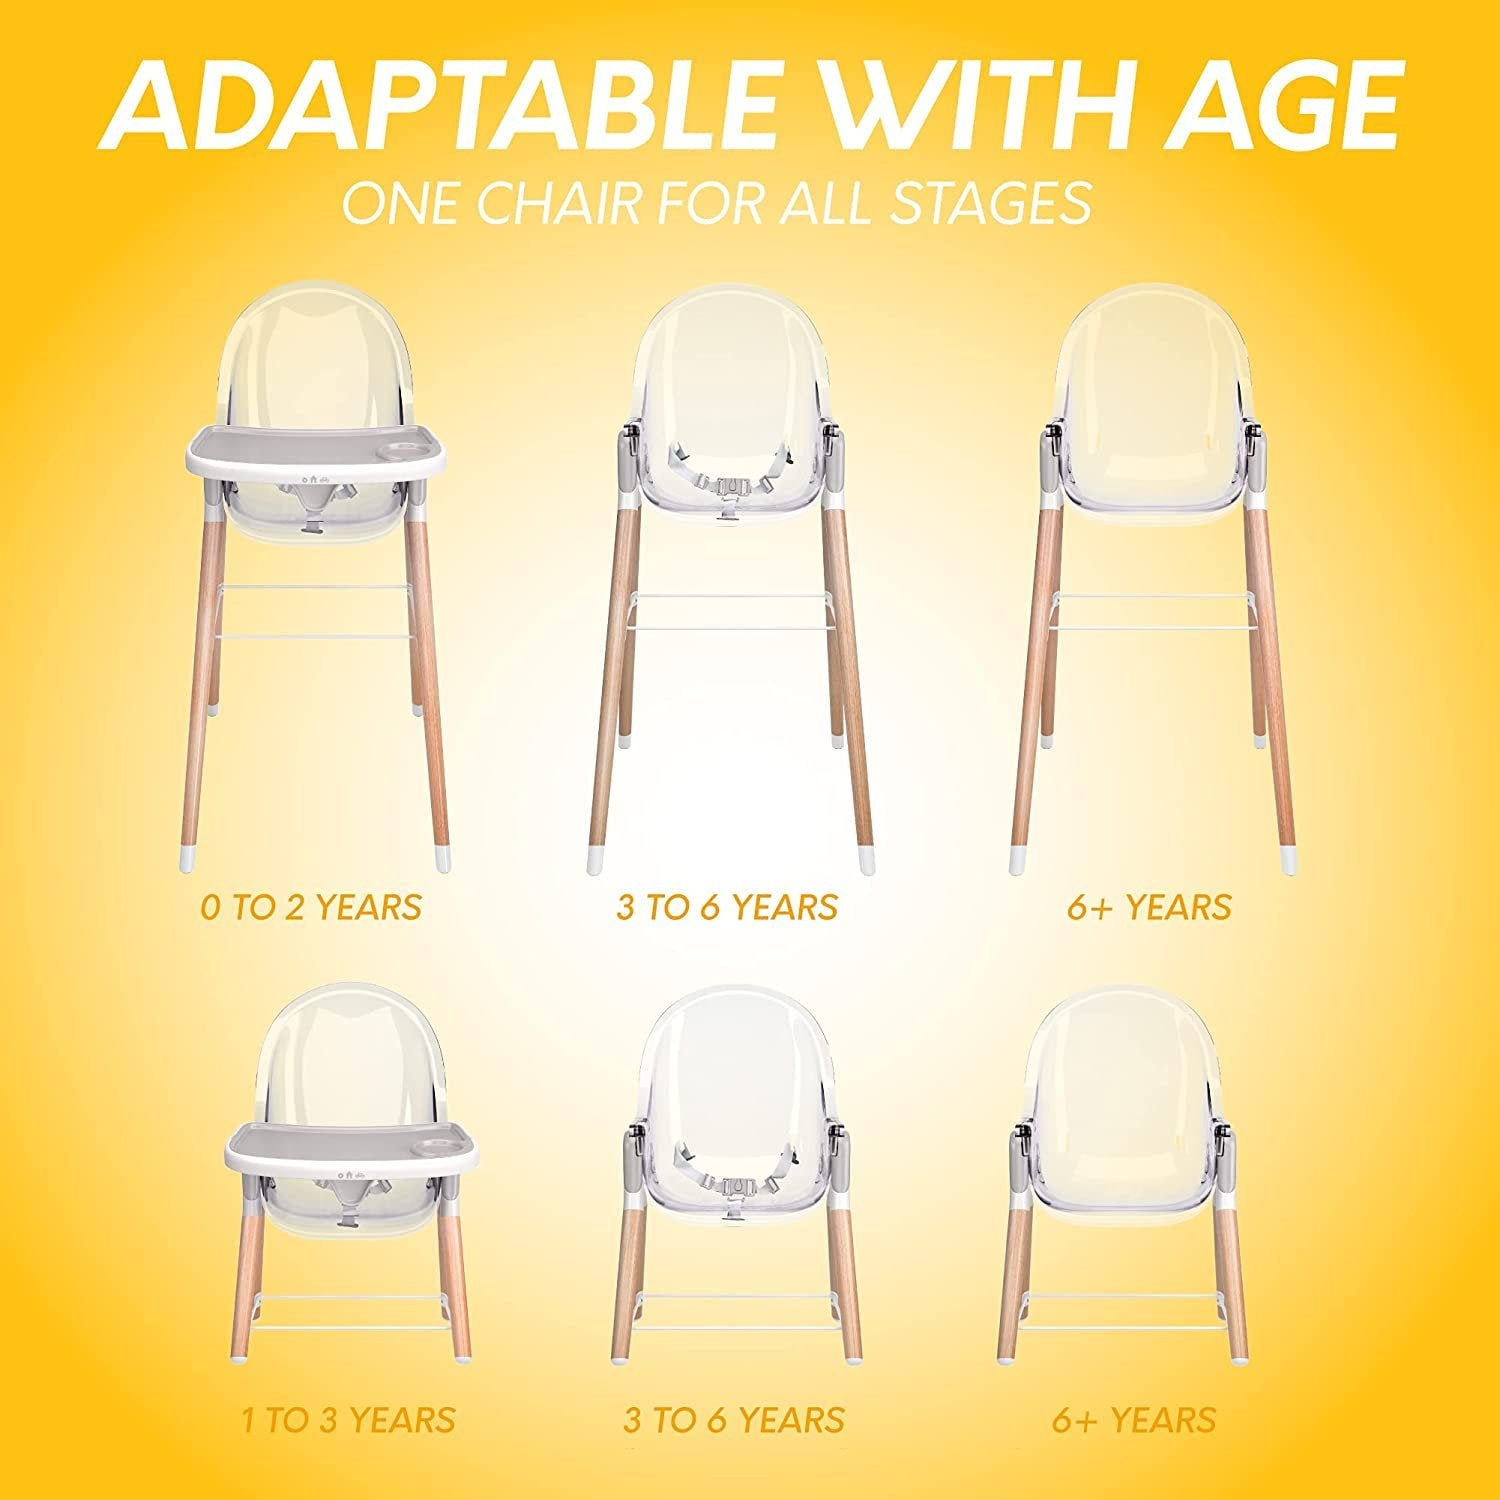 Children of Design Deluxe High Chair | Grey/Clear | 6-in-1 | 3 Seat Positions | 2 Heights | Easy Clean | Removable Tray | Compact